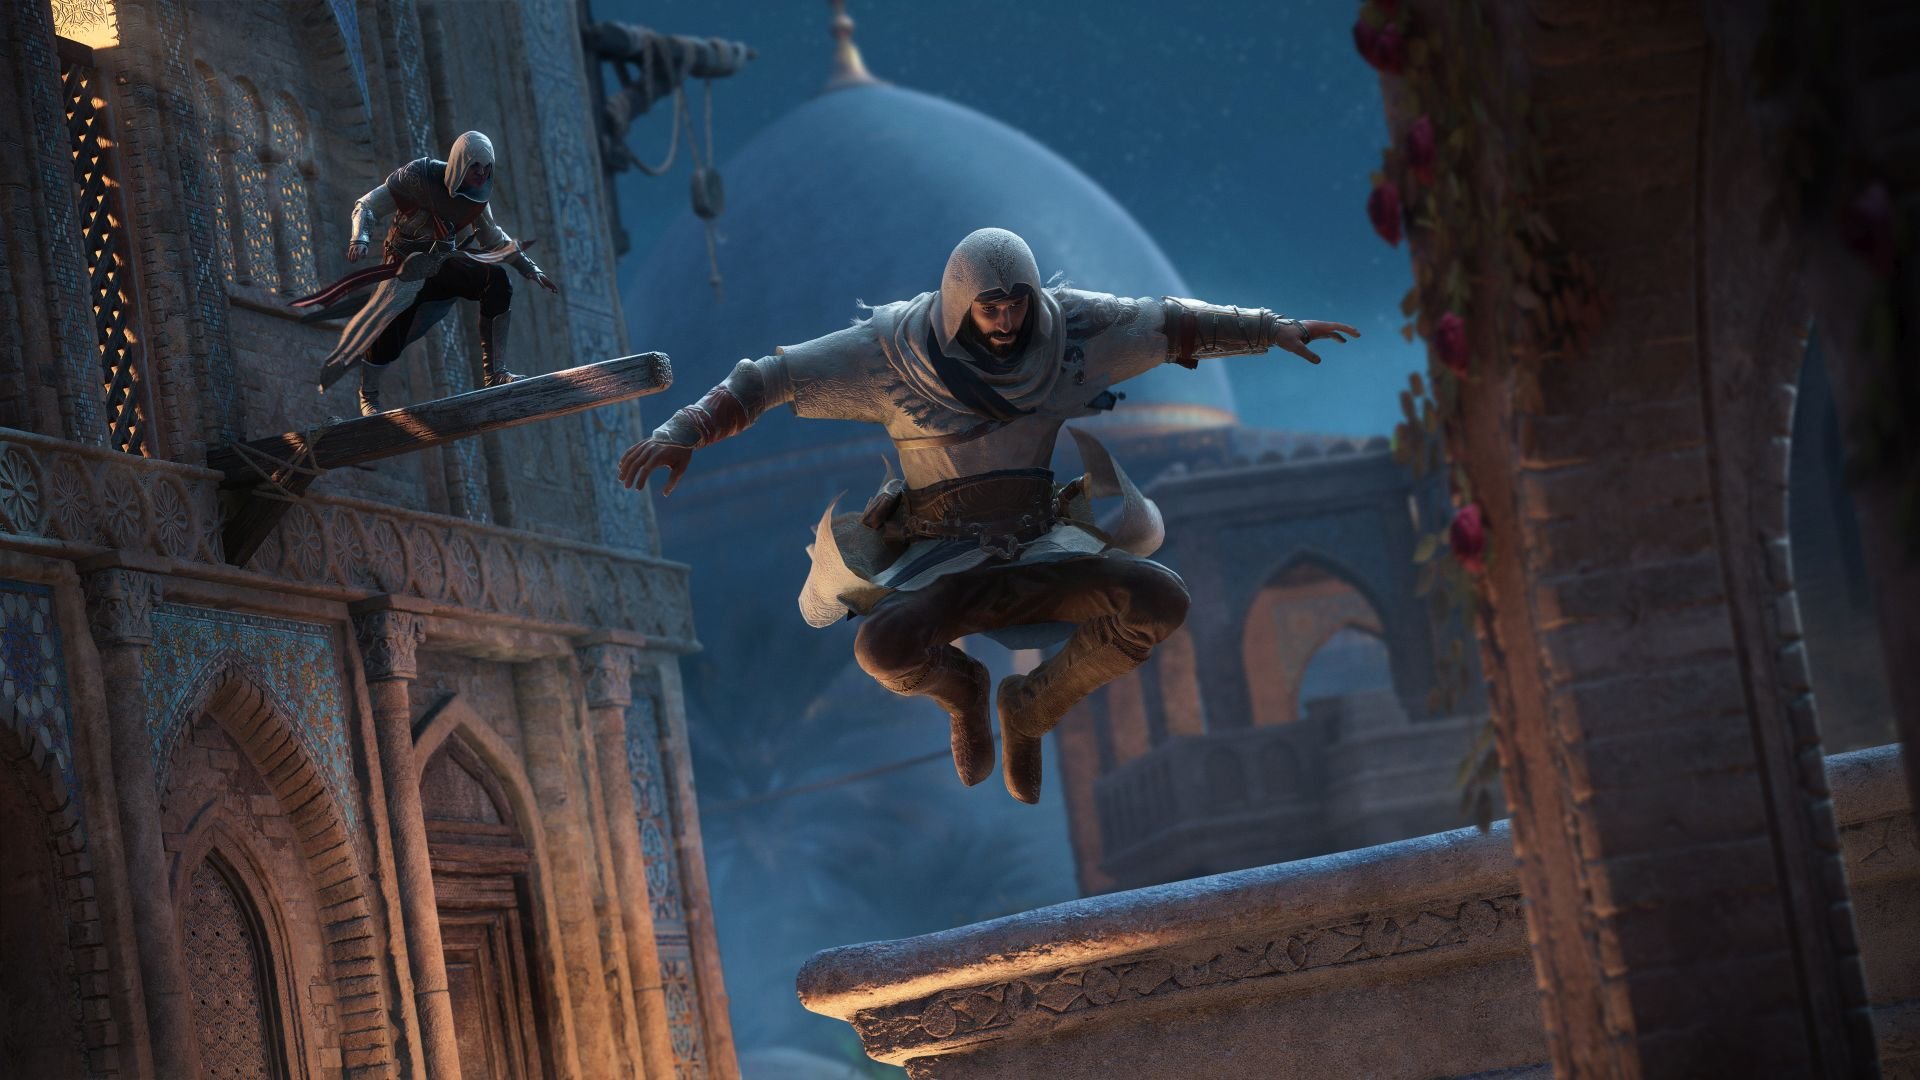 New Assassin's Creed video game brings Baghdad's Golden Age back